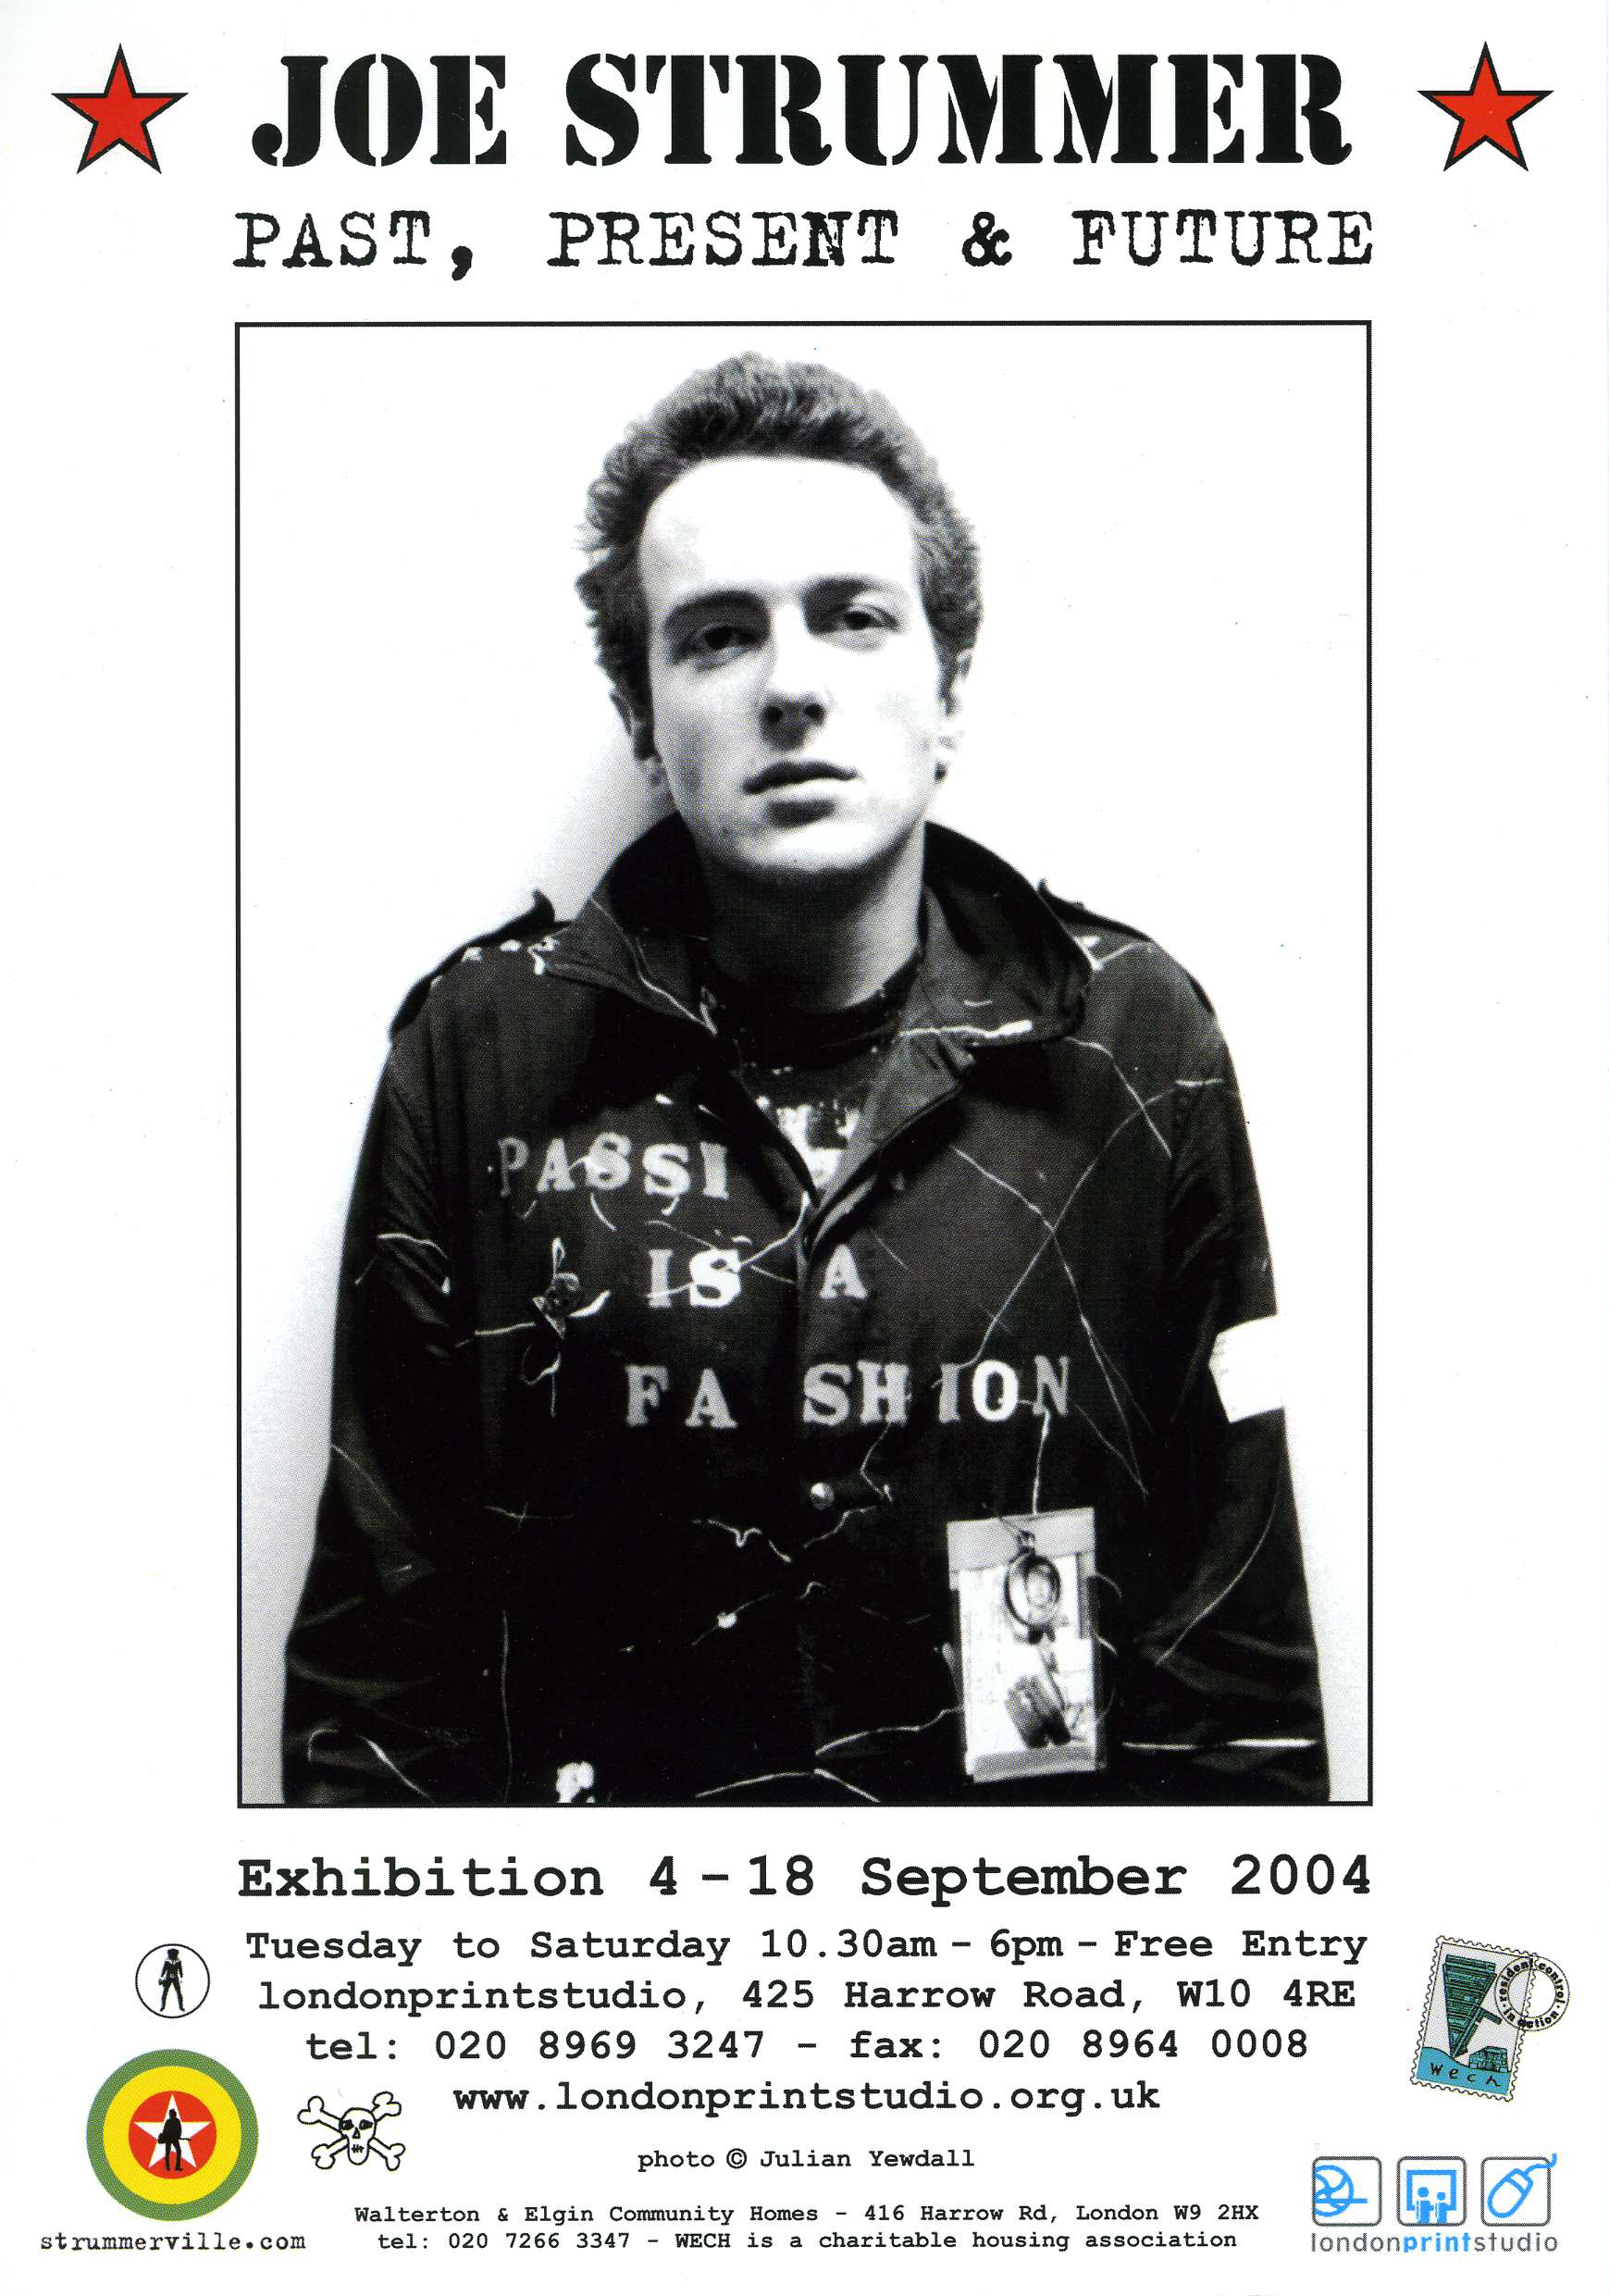 Joe Strummer's quotes, famous and not much - Sualci Quotes